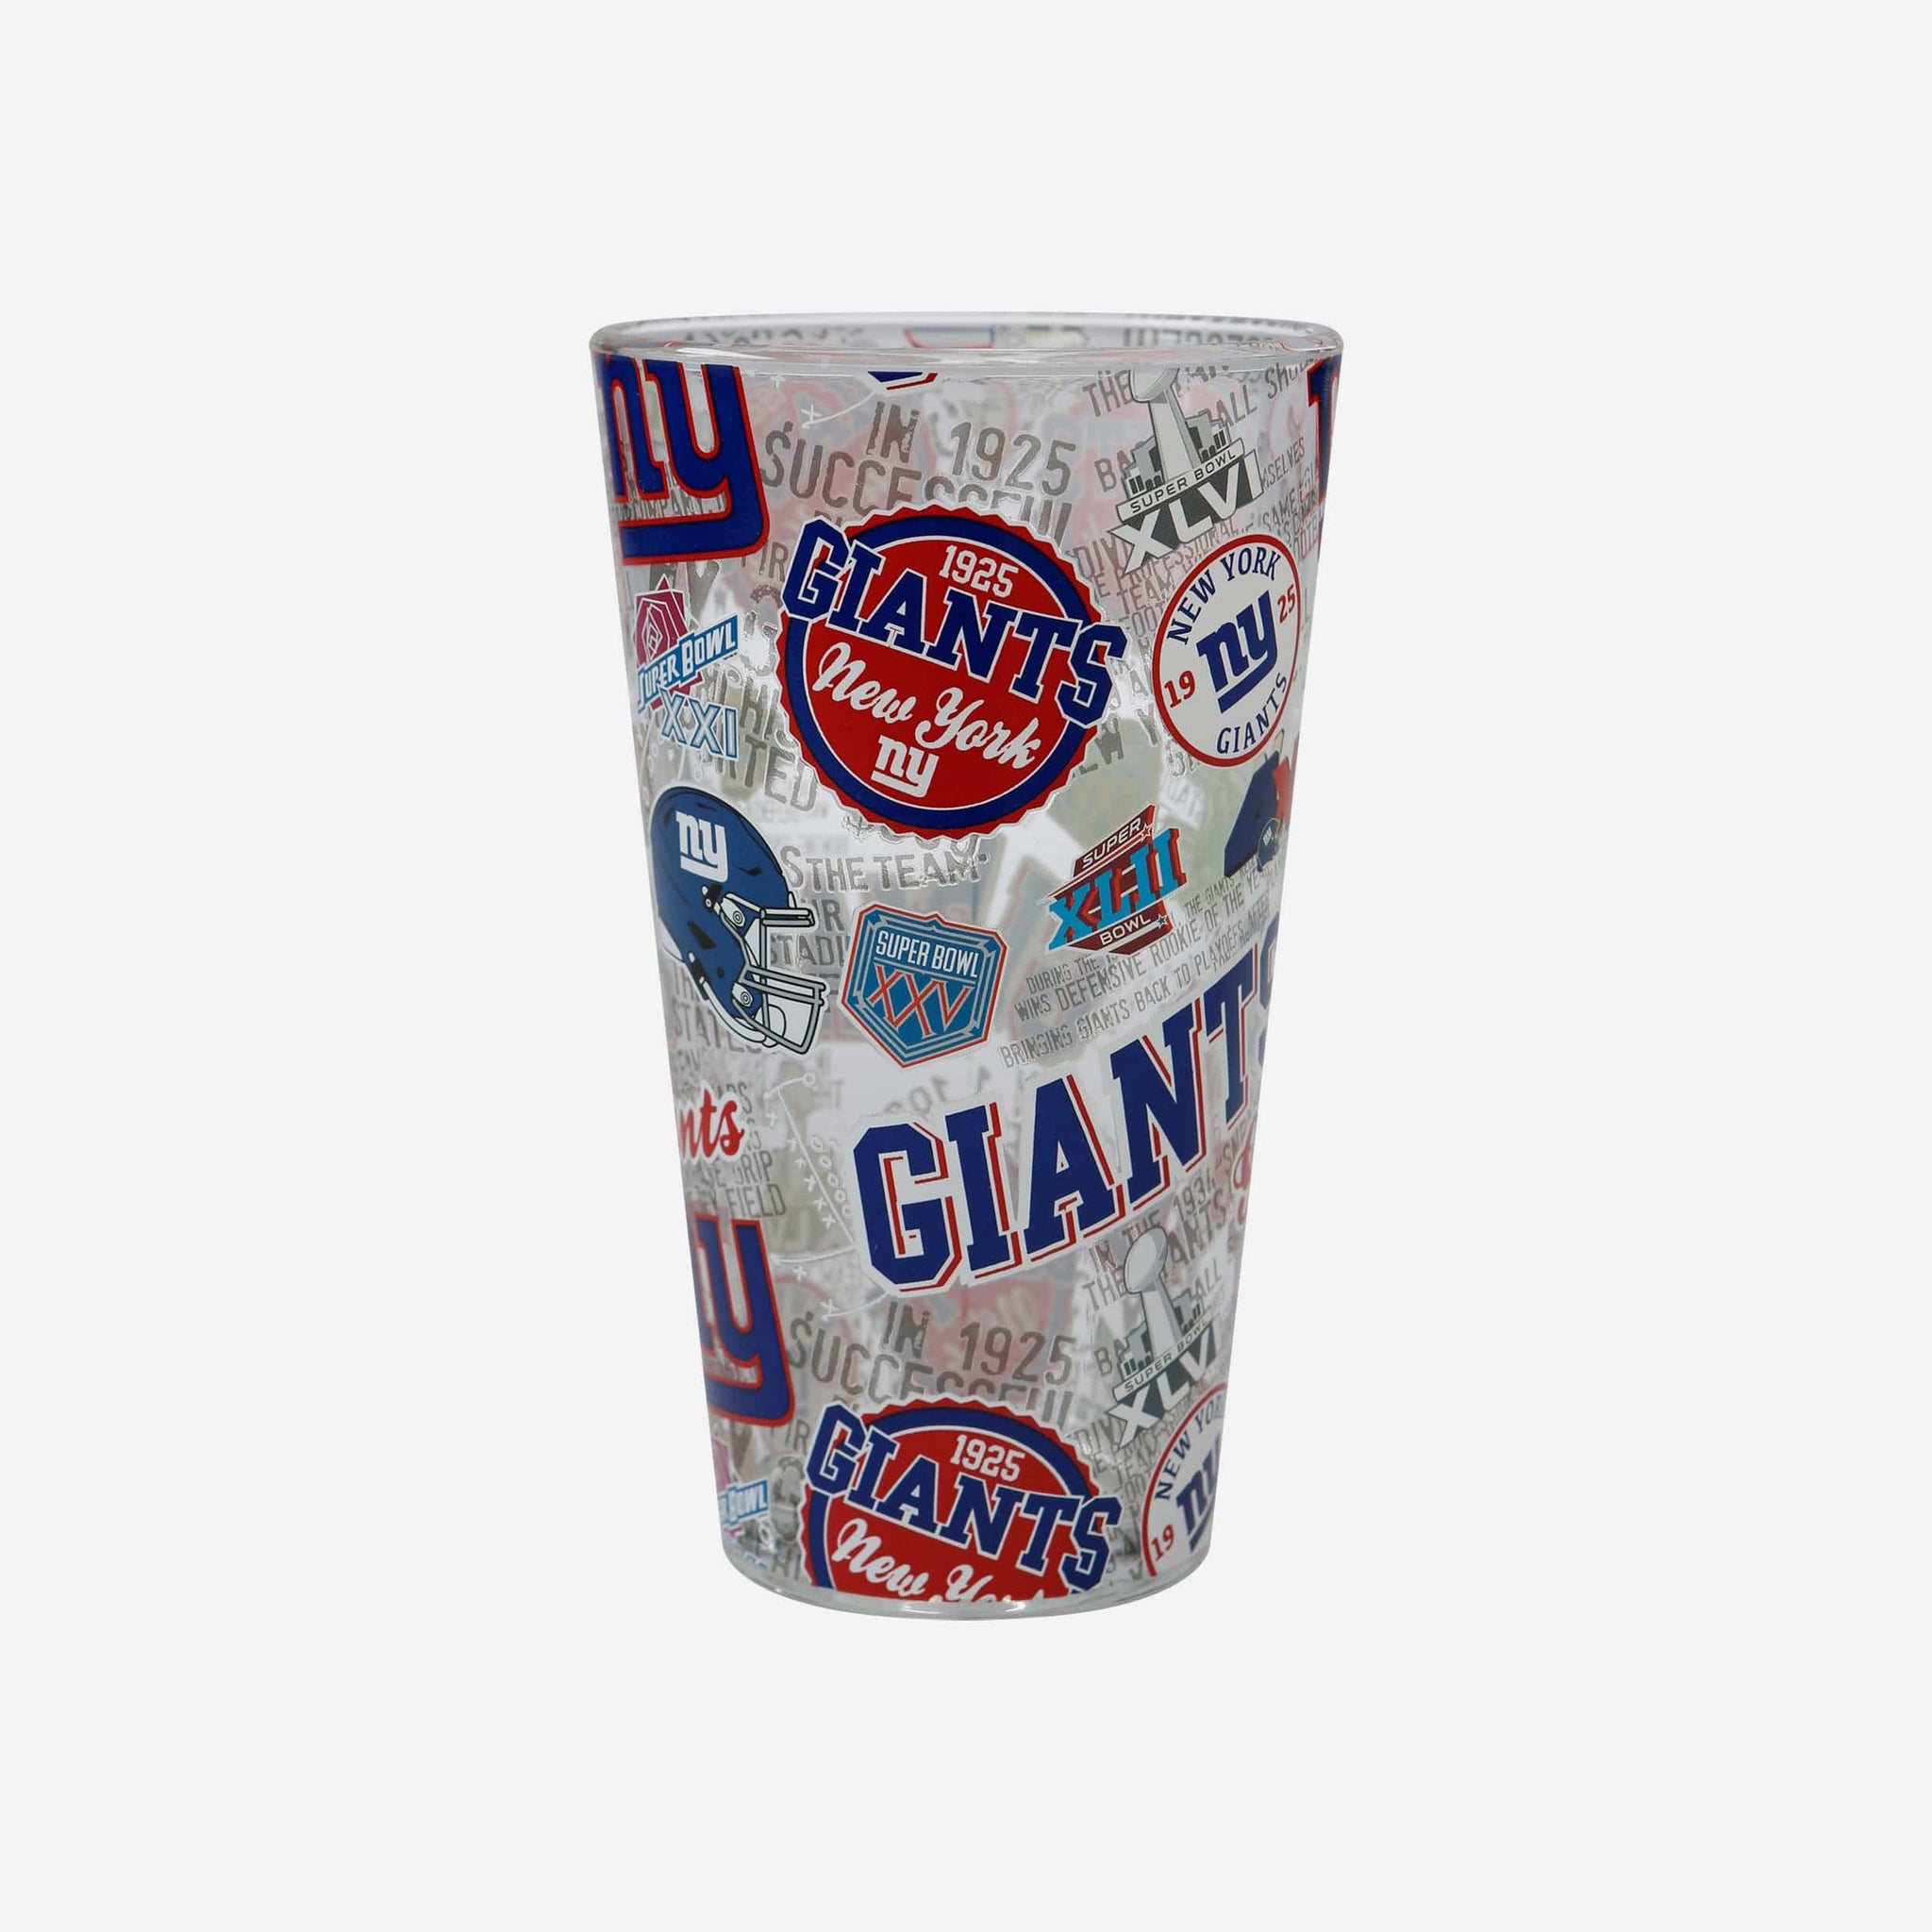 NBA All-Star 2024 Indianapolis 16oz Wordmark Tumbler by Simple